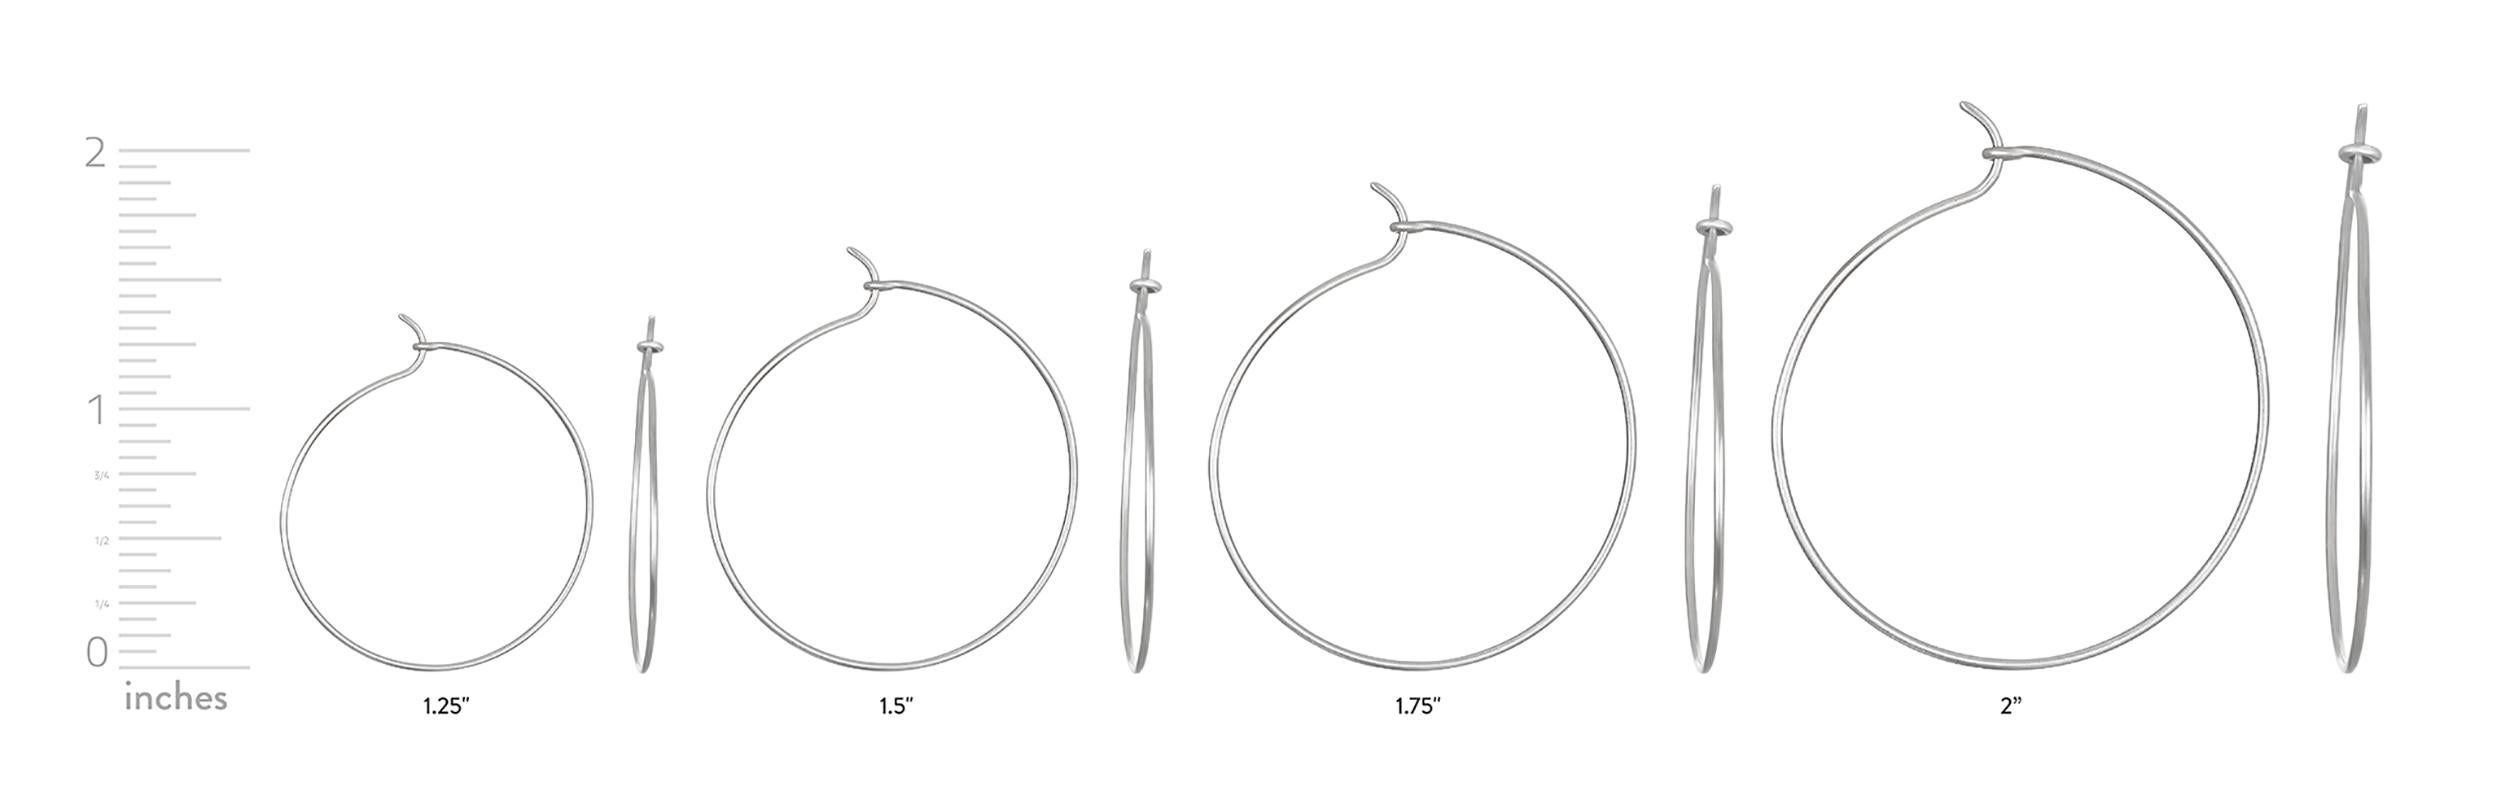 Faye Kim's Signature Platinum handmade wire hoops are a must-have for every jewelry wardrobe. Casual, chic and wearable every day, the hoops give endless opportunities to change your look with different drops, sold separately.

Hoops 1.75